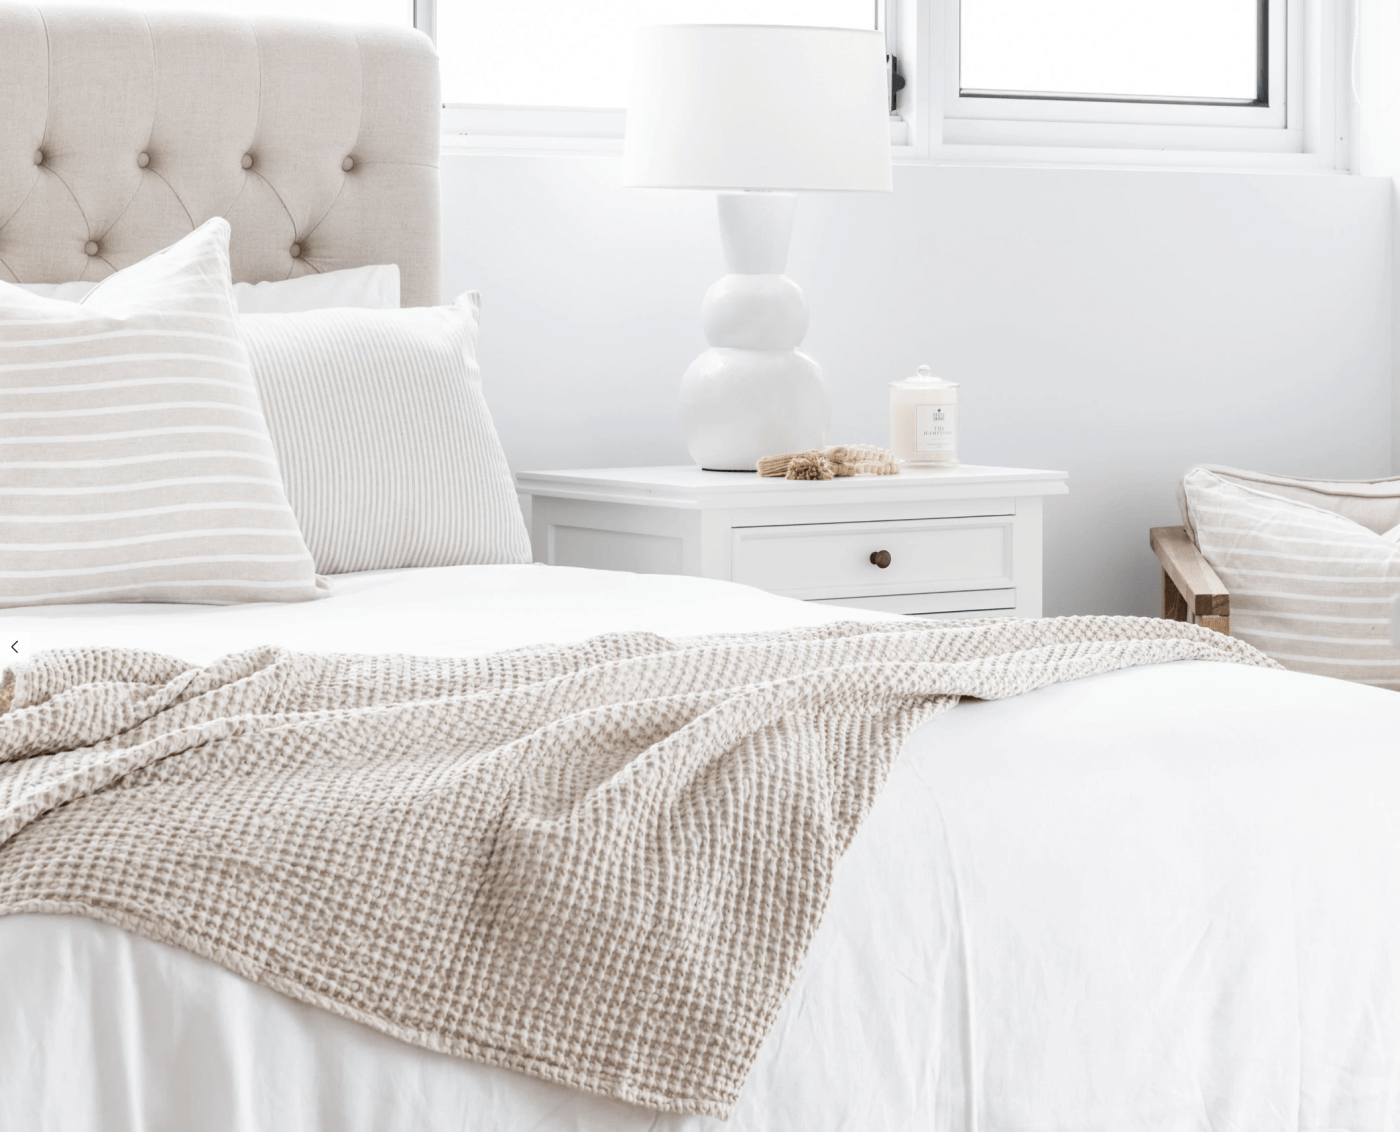 Create a sanctuary in your Hamptons bedroom